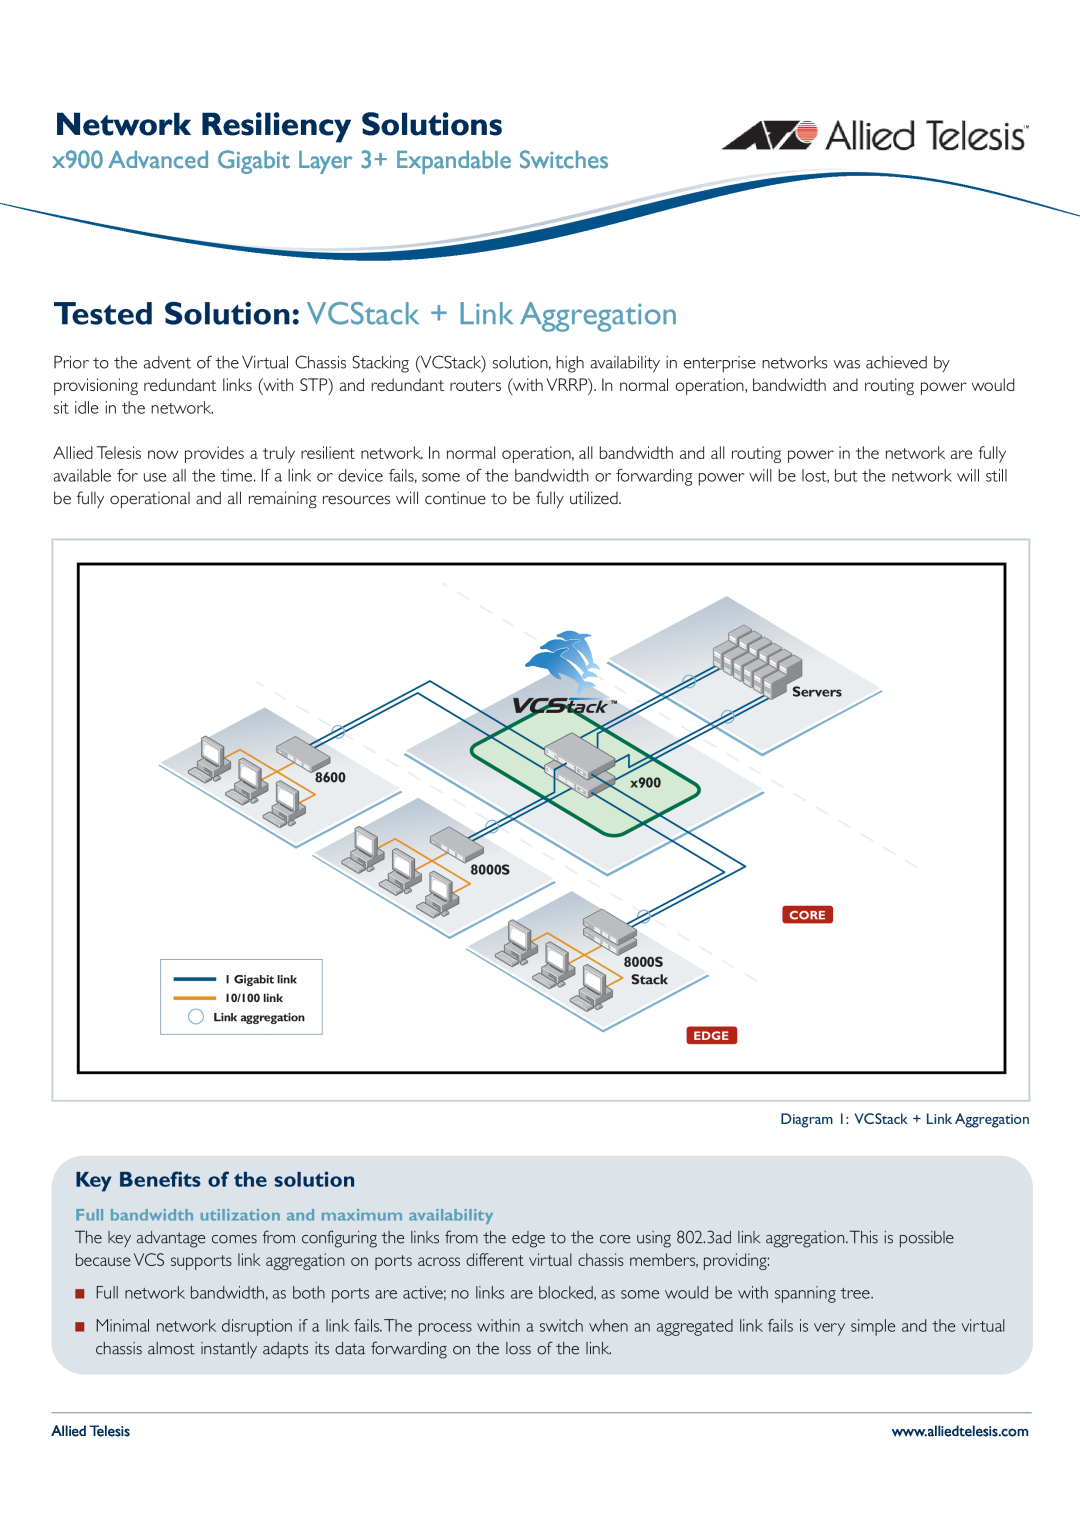 Allied Telesis x900 Advanced Gigabit Layer 3+ Expandable Switches manual Key Benefits of the solution 